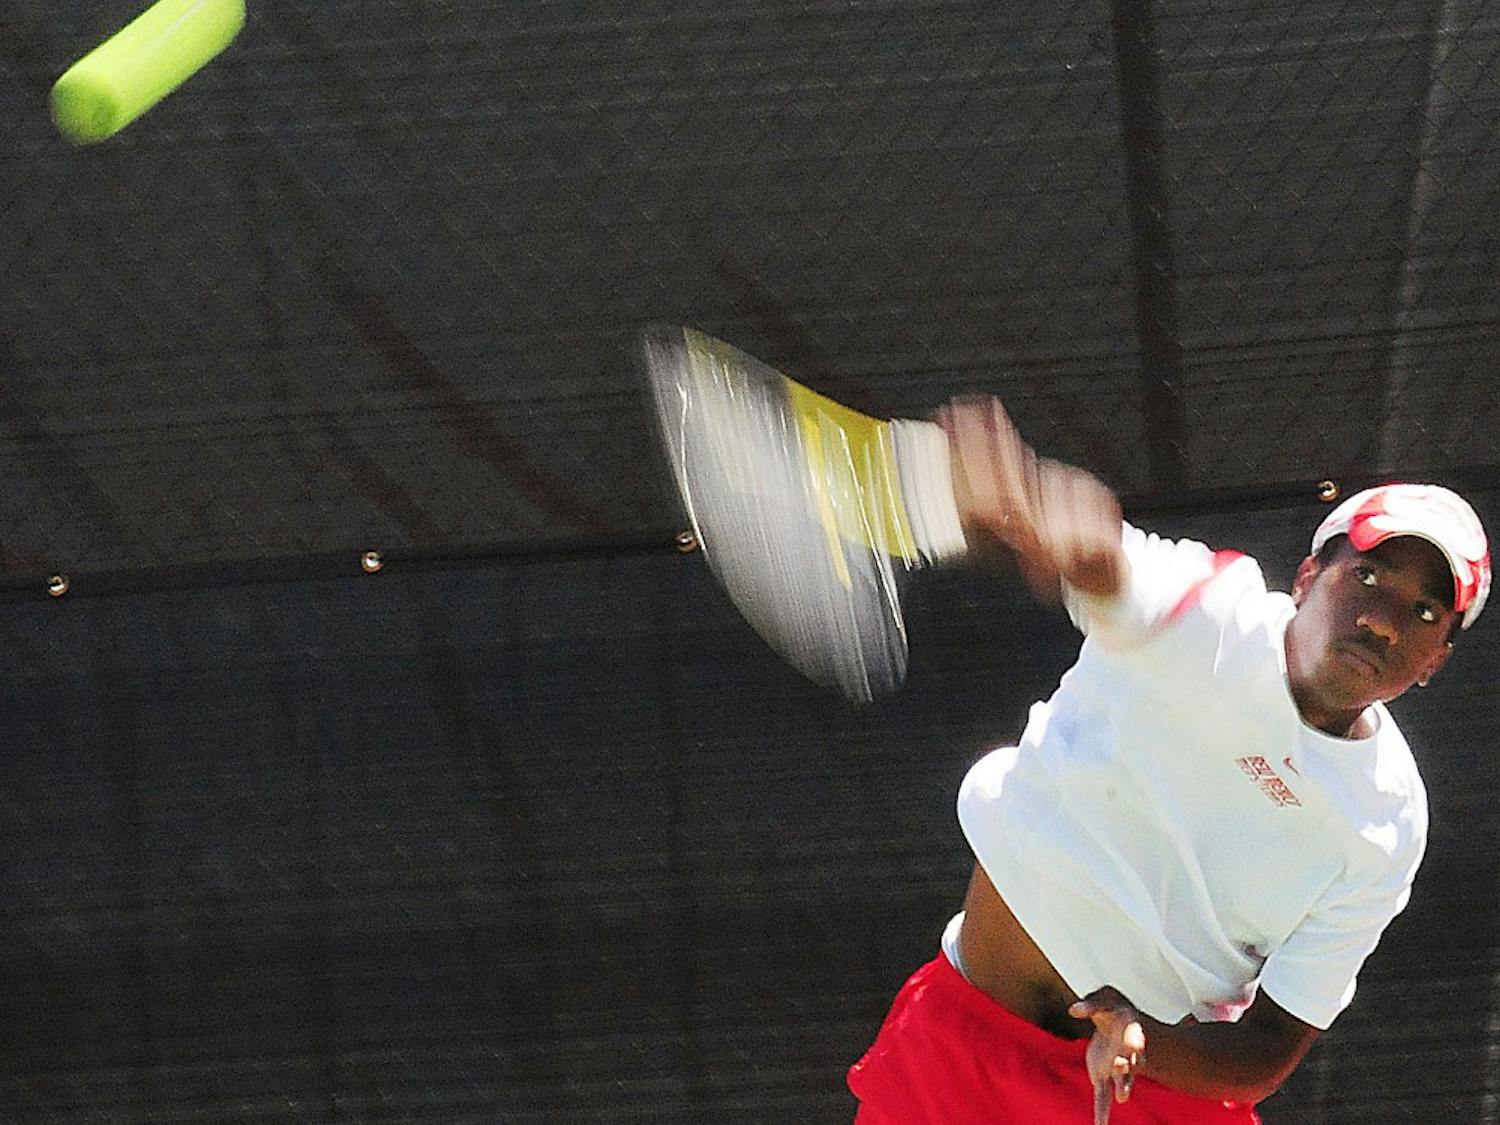 	Jadon Phillips serves to his opponent on Thursday at the Linda Estes Tennis Center. Phillips lost his match. The Lobos lost 4-3 to Boise State.